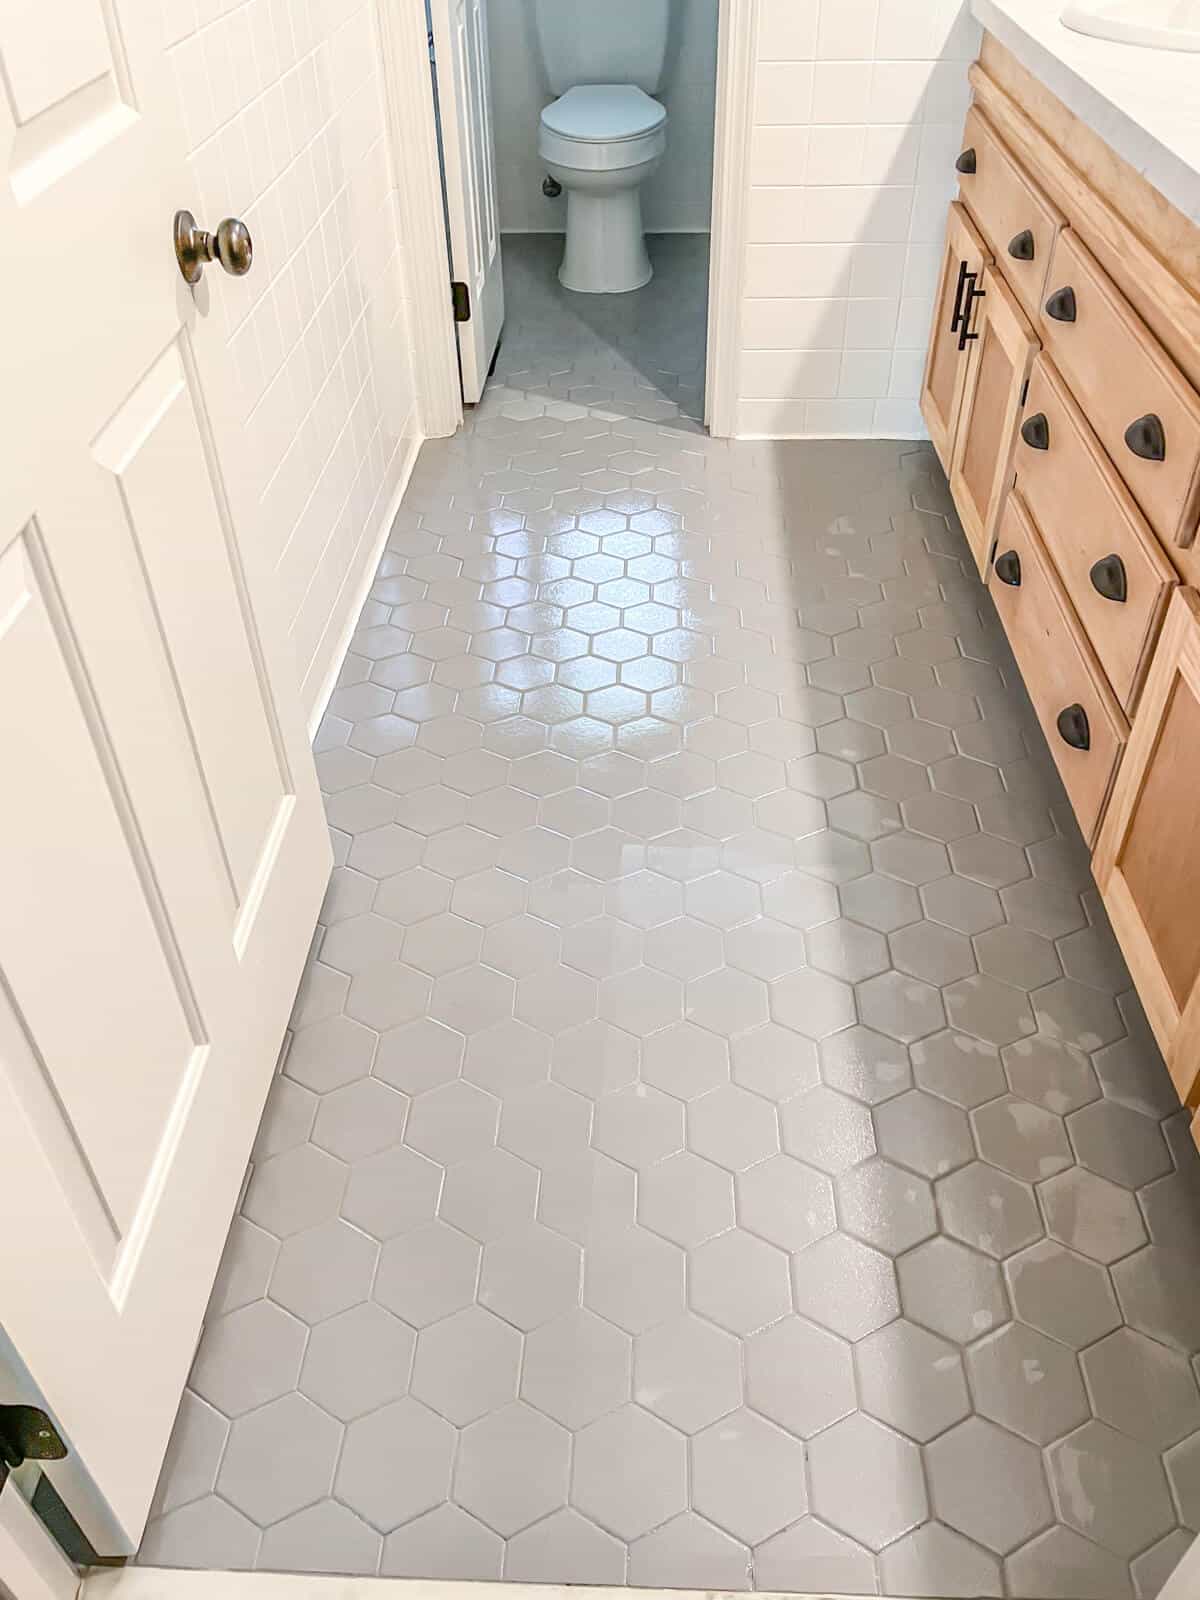 can bathroom tiles be painted